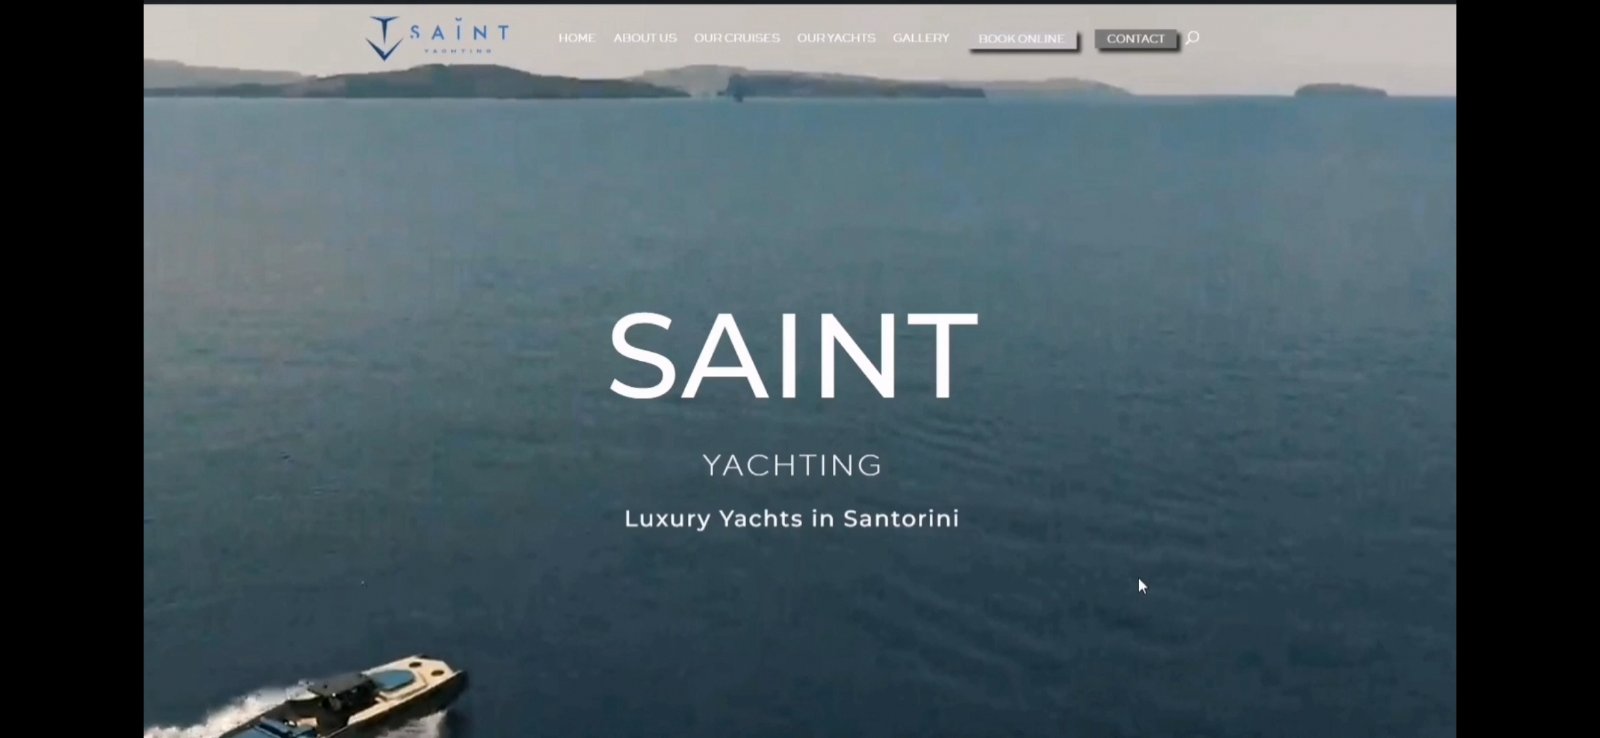 website yachting services